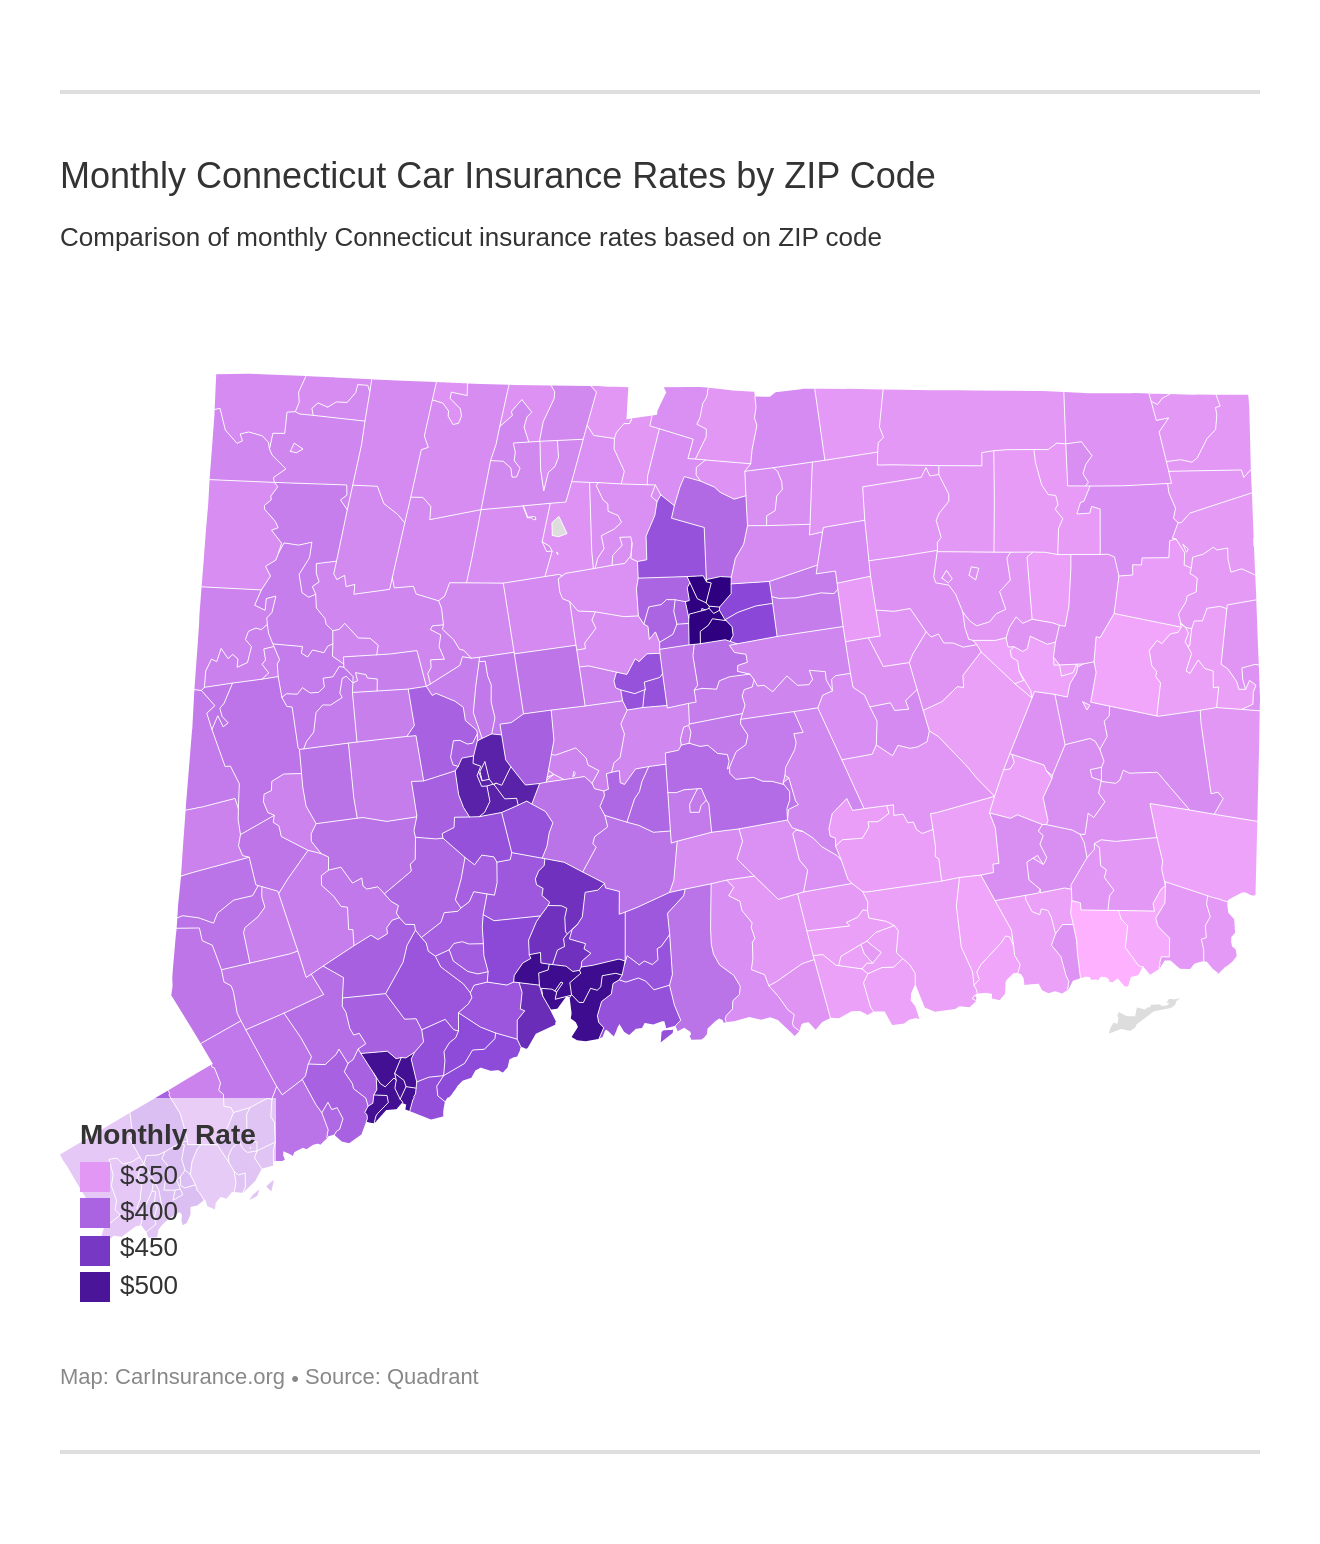 Monthly Connecticut Car Insurance Rates by ZIP Code